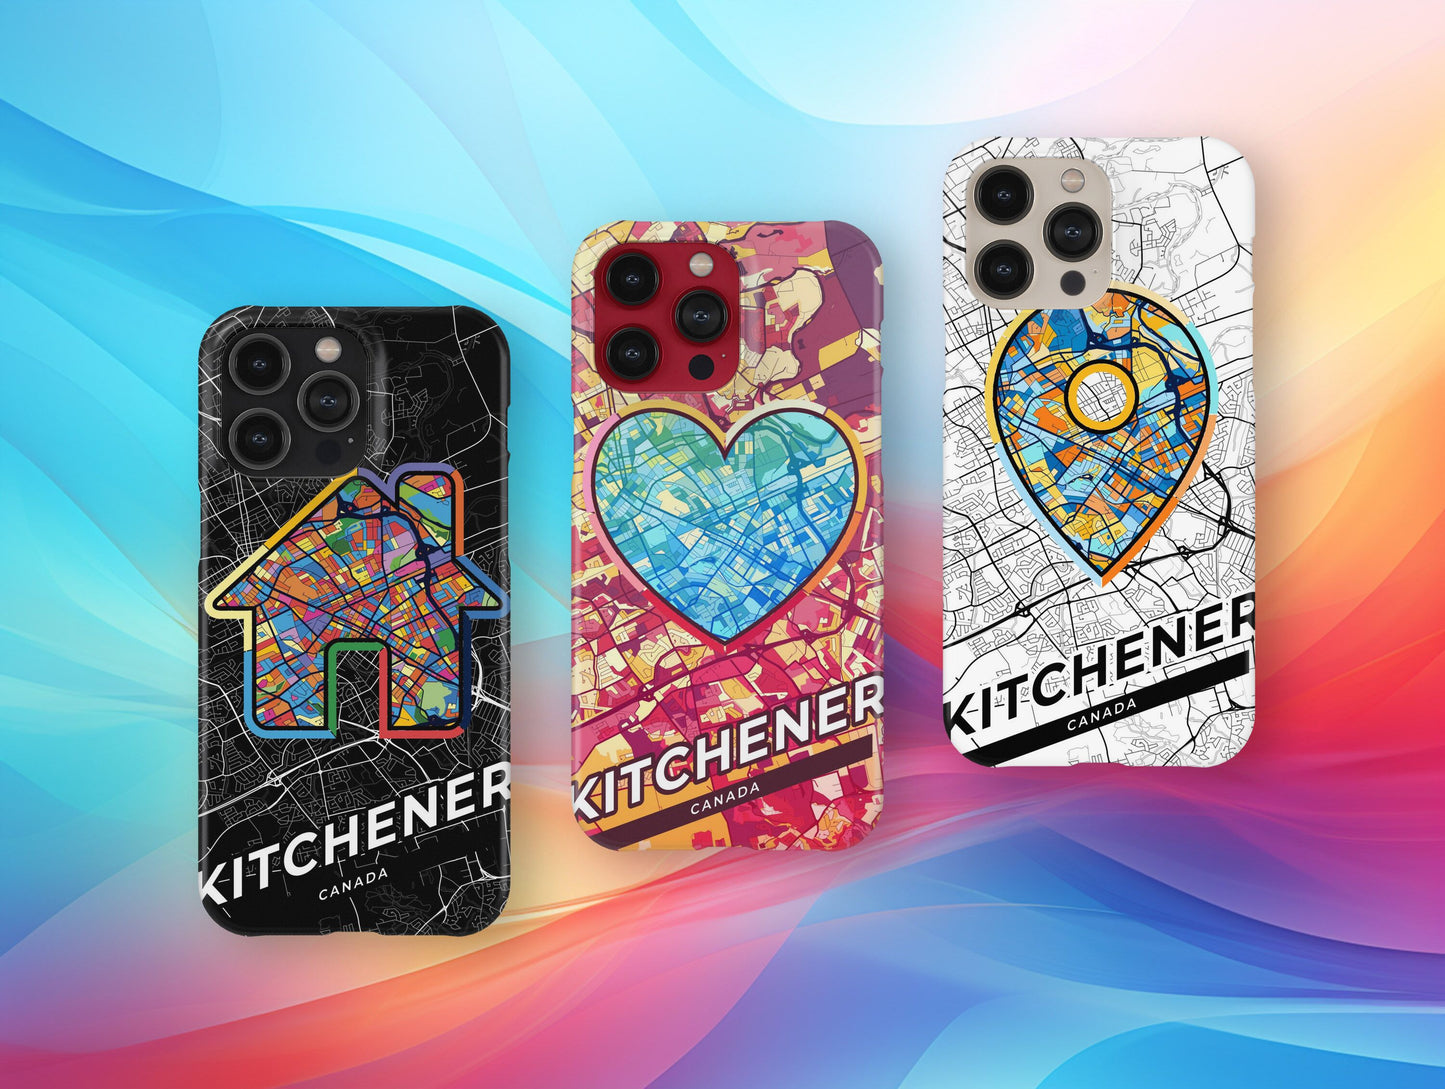 Kitchener Canada slim phone case with colorful icon. Birthday, wedding or housewarming gift. Couple match cases.